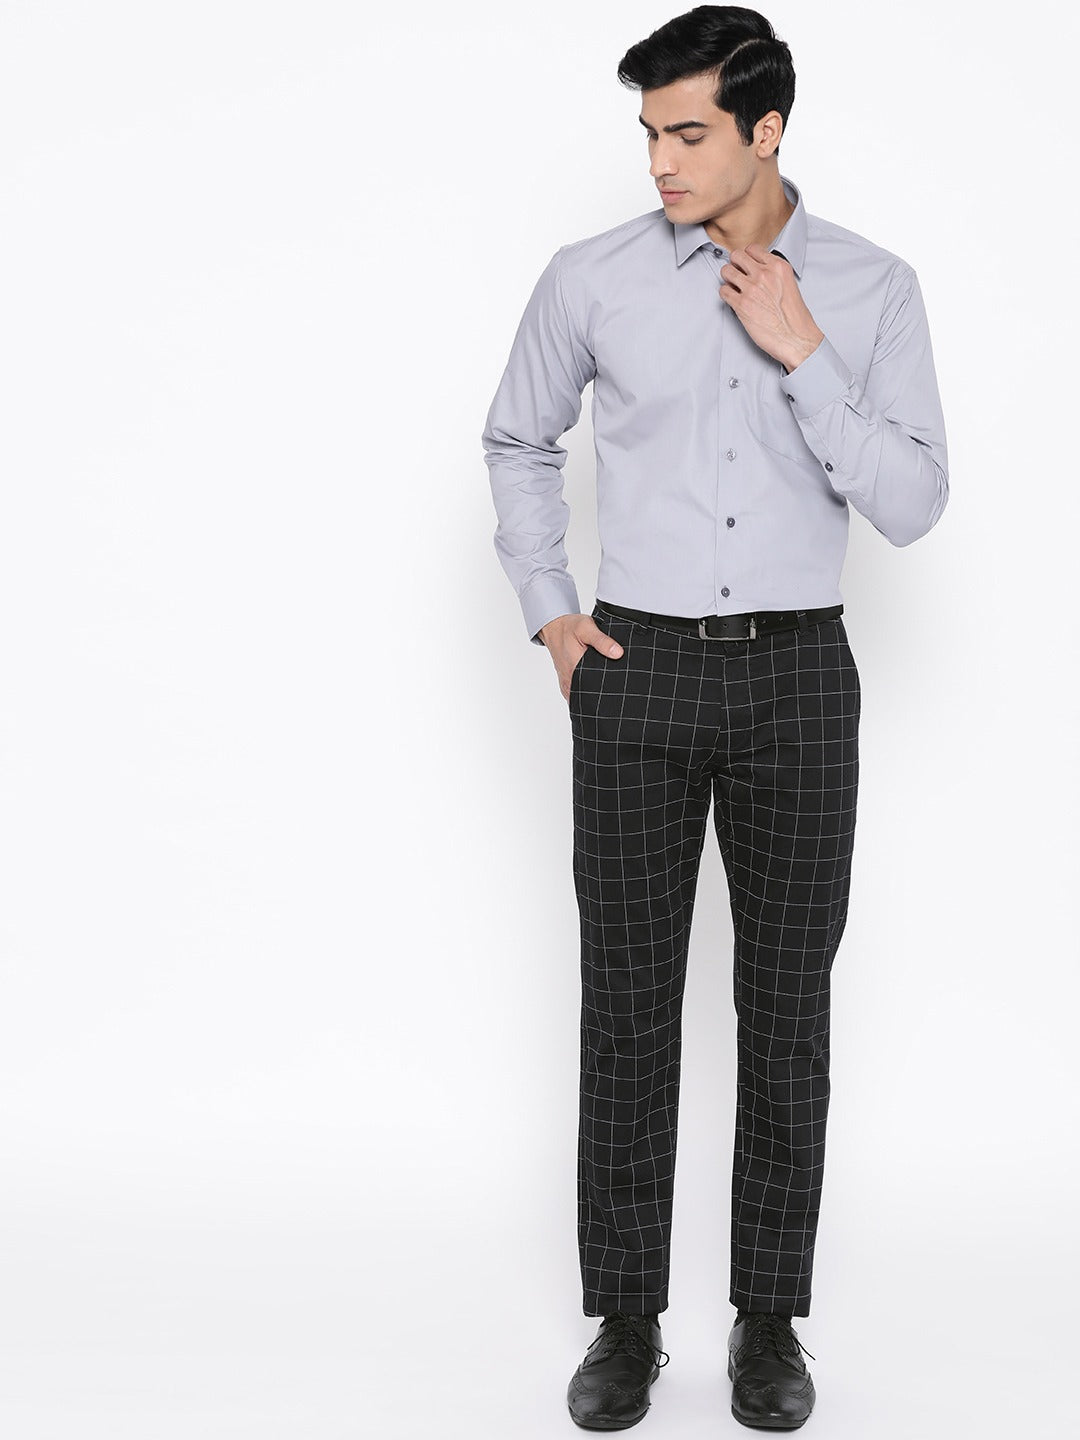 Mens Plaid Slim Fit Pants 2021 Business Casual Vintage Check Suit Formal  Trousers For Men For Weddings And Casual Wear From Maoku, $25.77 |  DHgate.Com